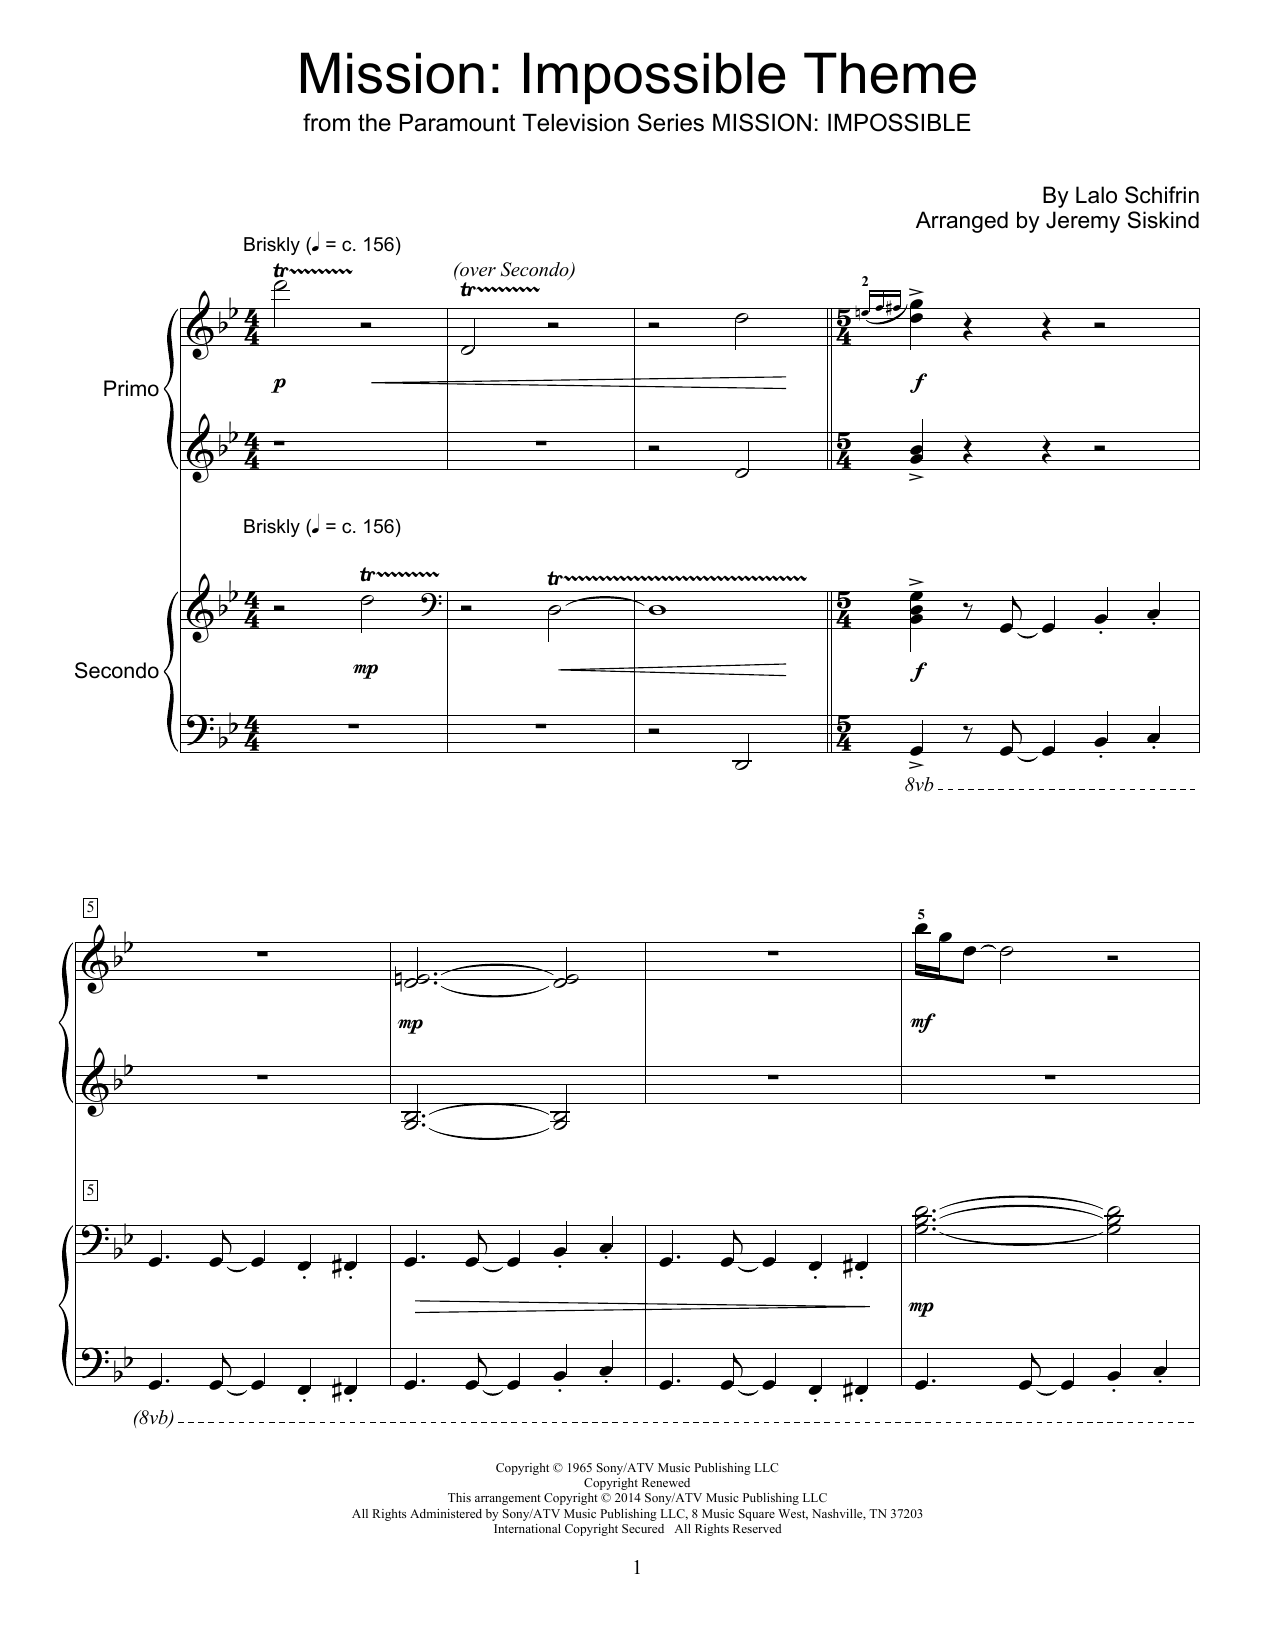 Download Jeremy Siskind Mission: Impossible Theme Sheet Music